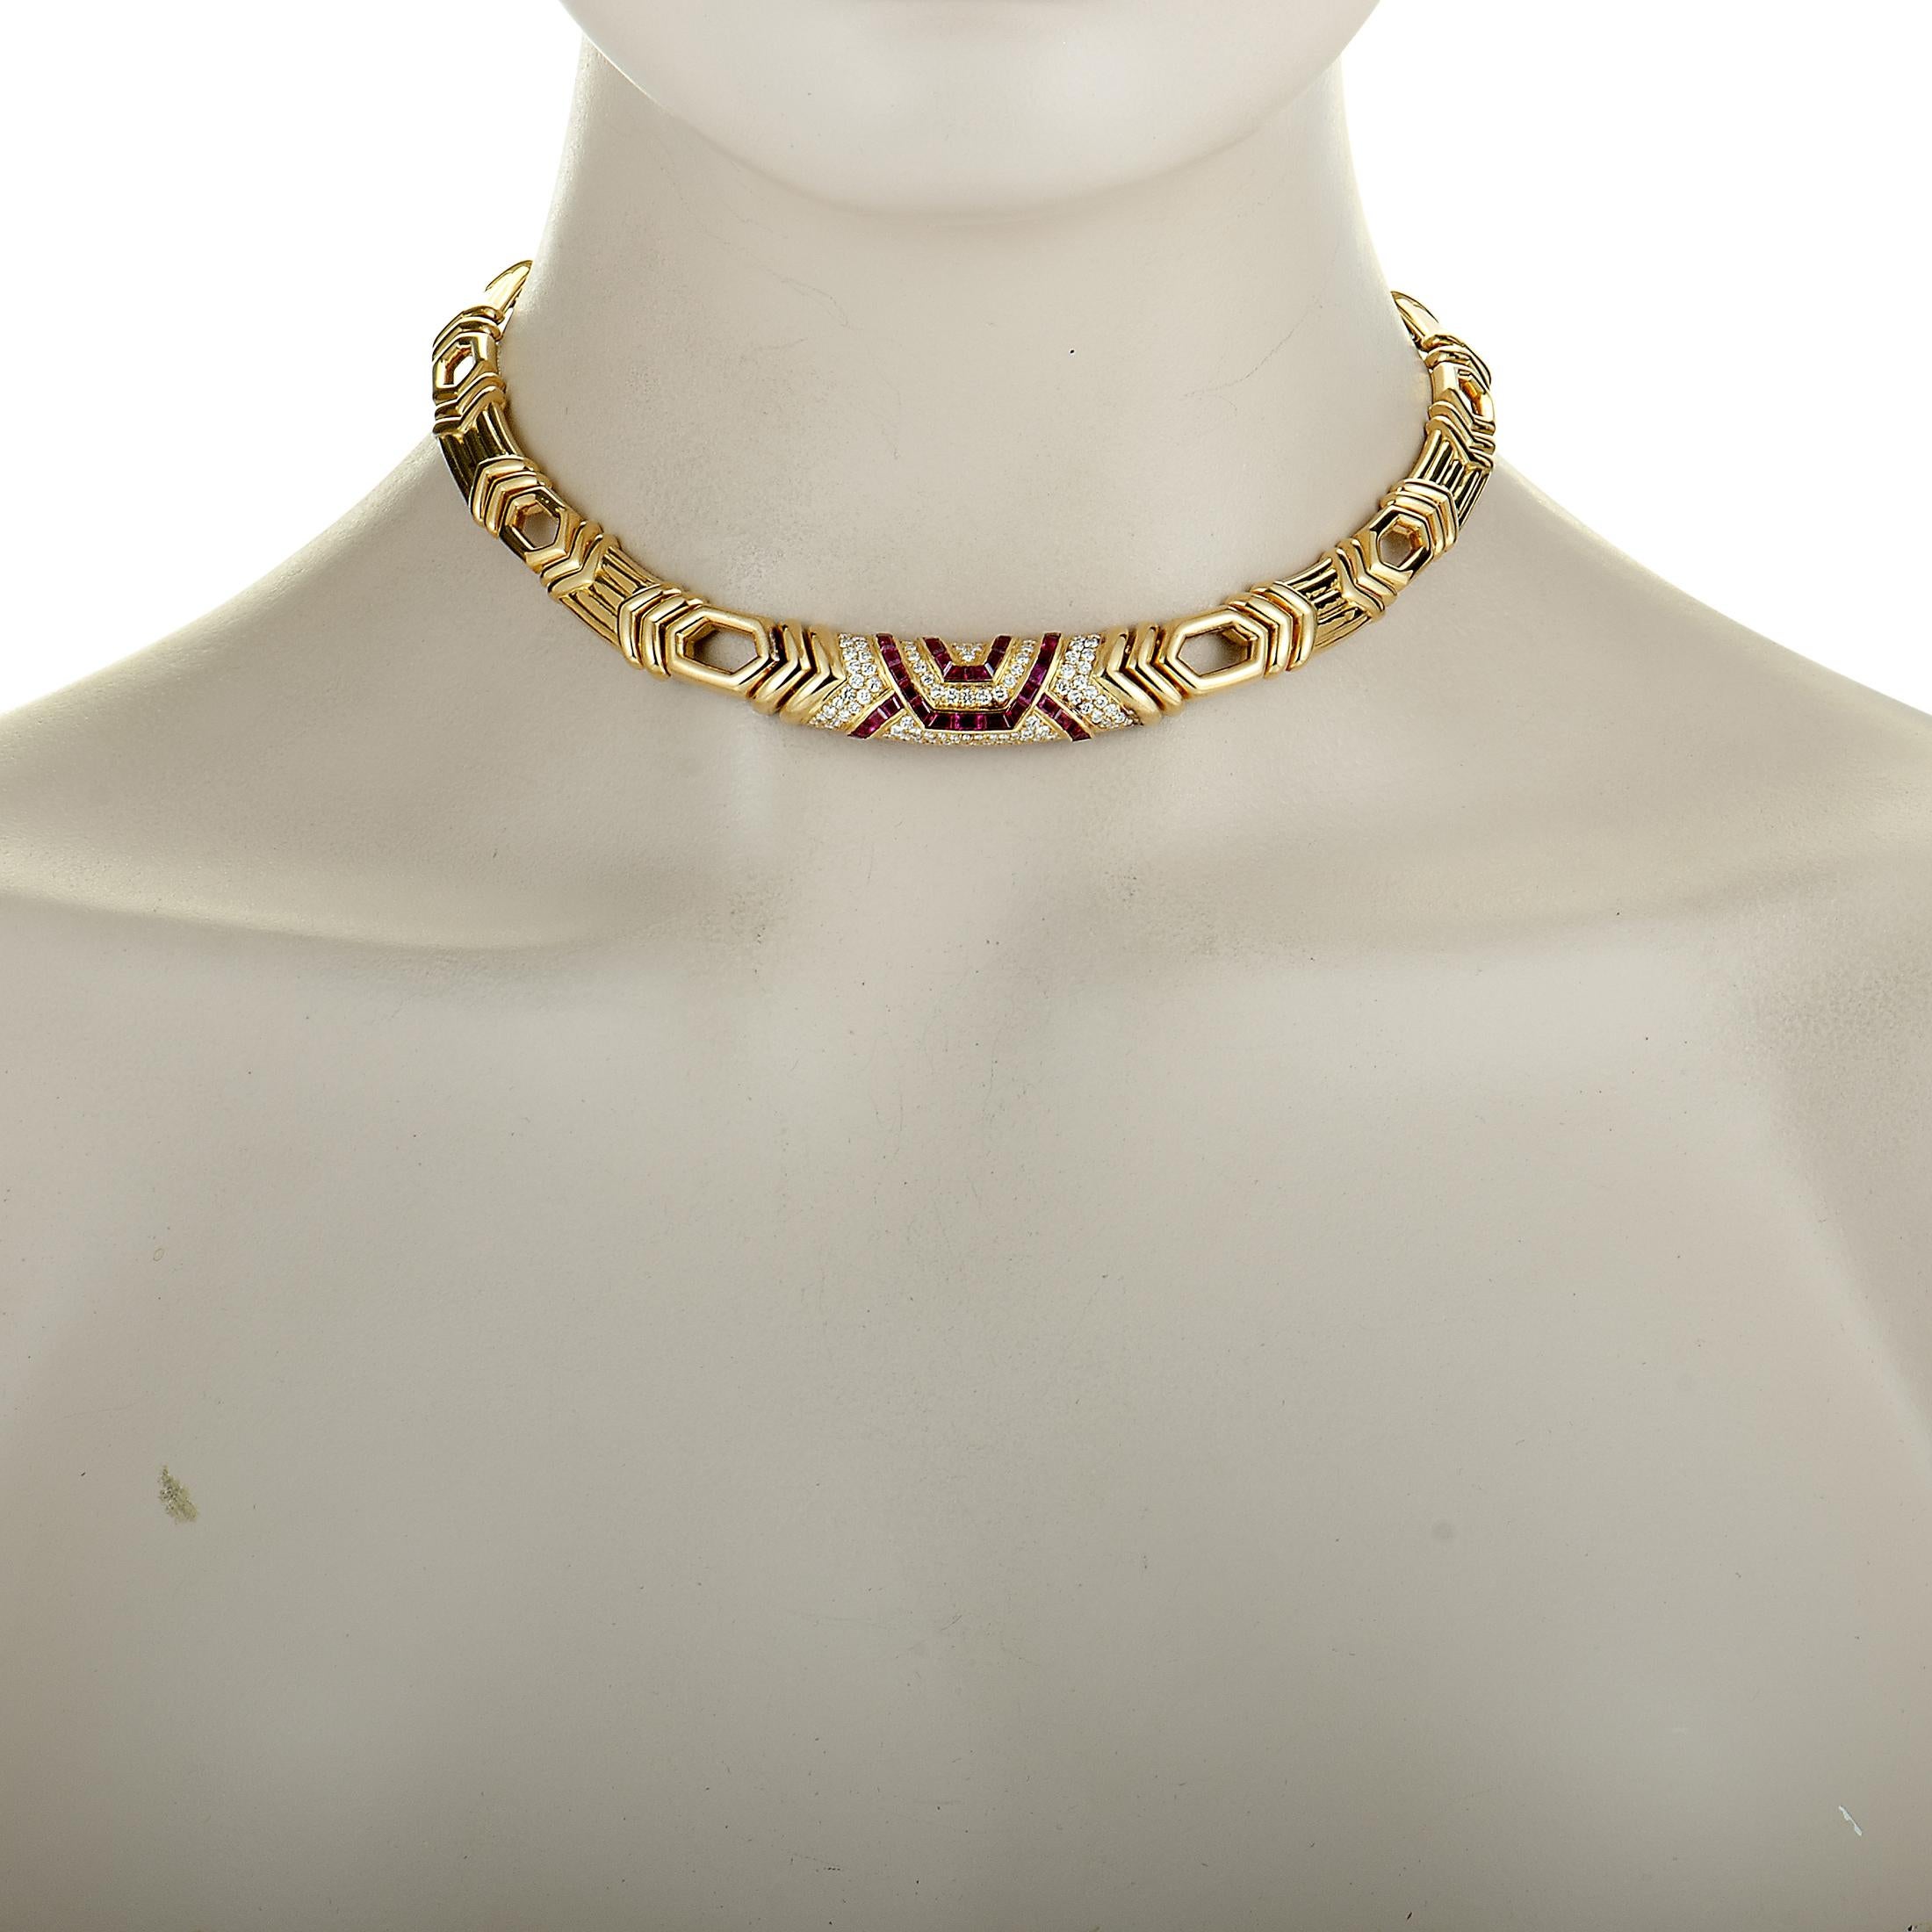 This Boucheron necklace is made of 18K yellow gold, and set with diamonds and rubies. The rubies weigh 2.25 carats and the diamonds total 1.65 carats, boasting grade F color and VVS clarity. The necklace has a chain length of 15”, weighs a total of